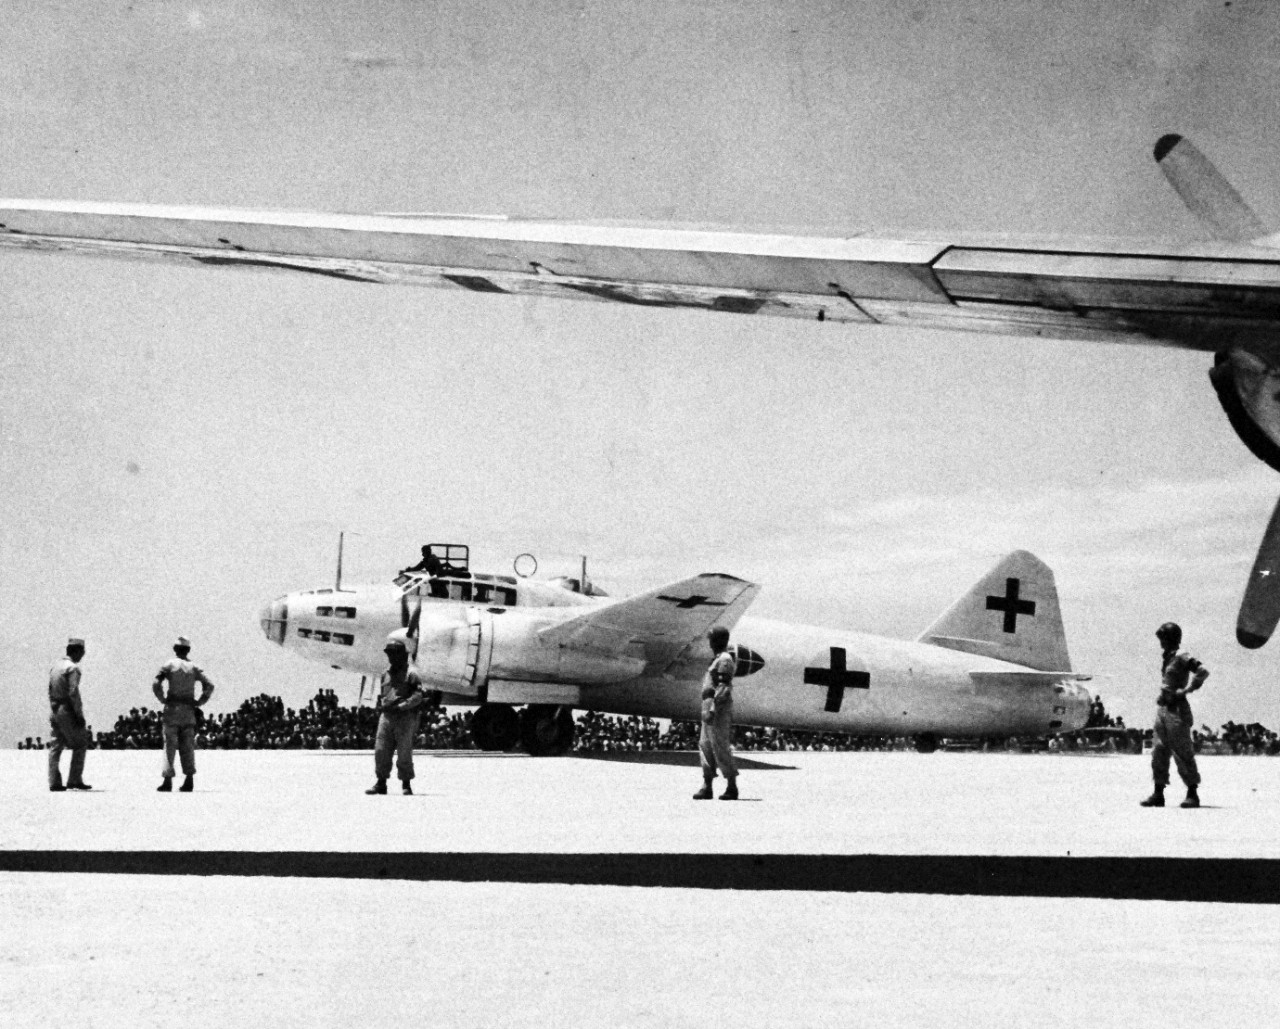 80-G-490351:  Surrender of Japan, August-September 1945.  A Japanese Mitsubishi G4M “Betty” which carried the envoys from Japan to General Douglas MacArthur in Manila, stops at Ie Shima airfield before proceeding to the Philippines, which will lead to the formal Japanese Surrender on September 2, 1945.  Note the Red Crosses on the plane. Photograph released August 19, 1945.  Official U.S. Navy Photograph, now in the collections of the National Archives.  (2015/11/10).